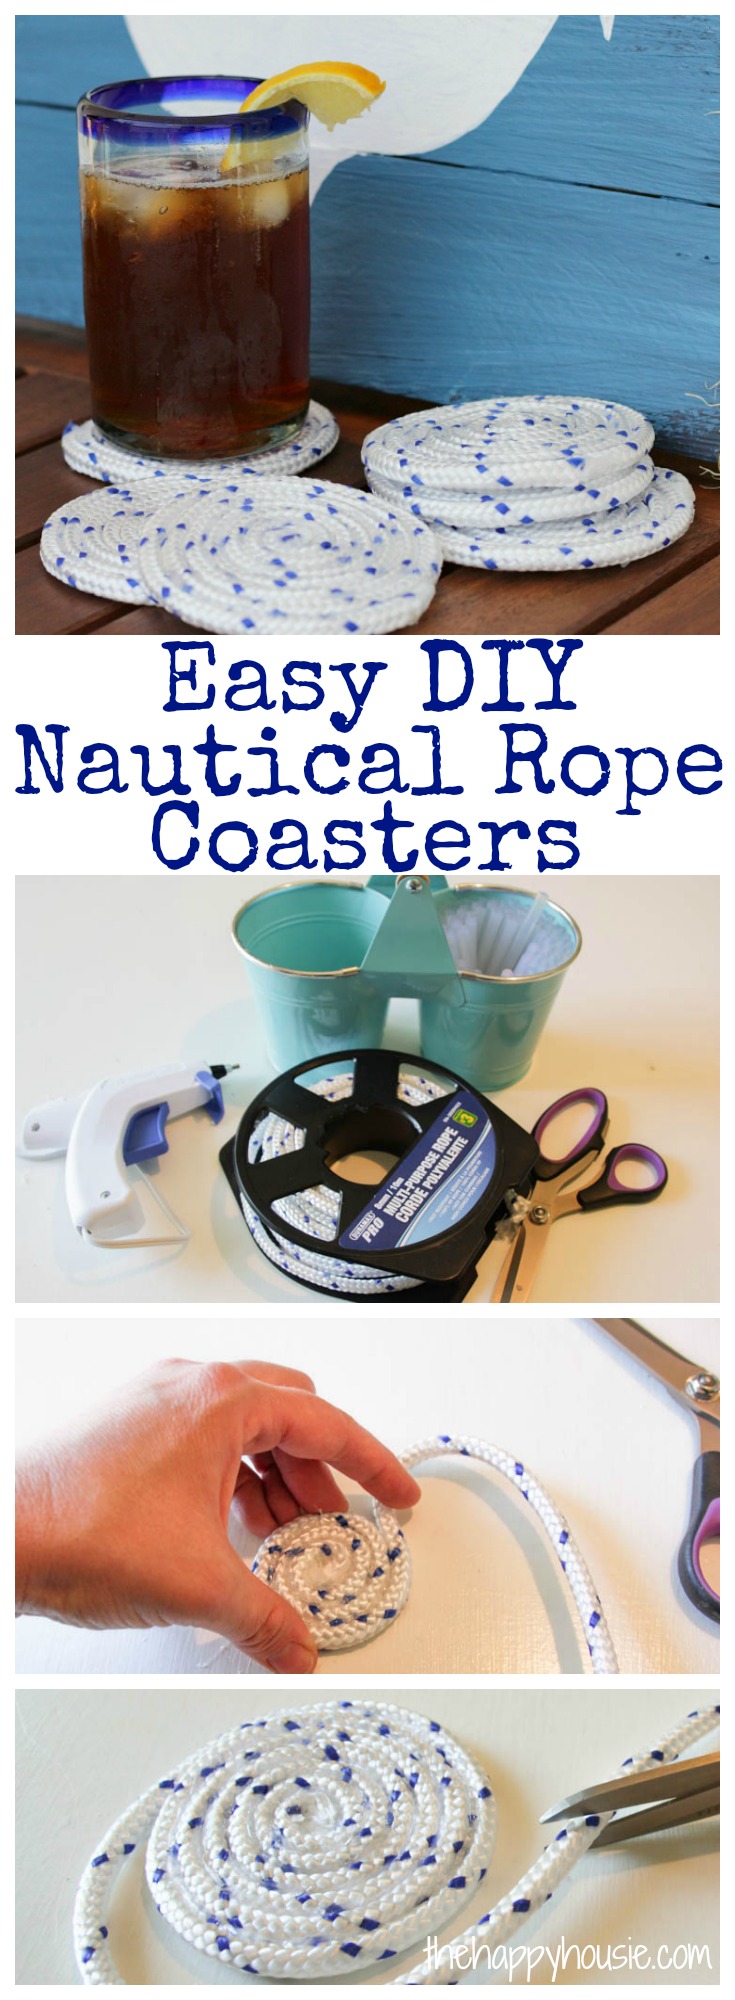 Super easy tutorial for how to make your own adorable outdoor coasters using nautical rope.